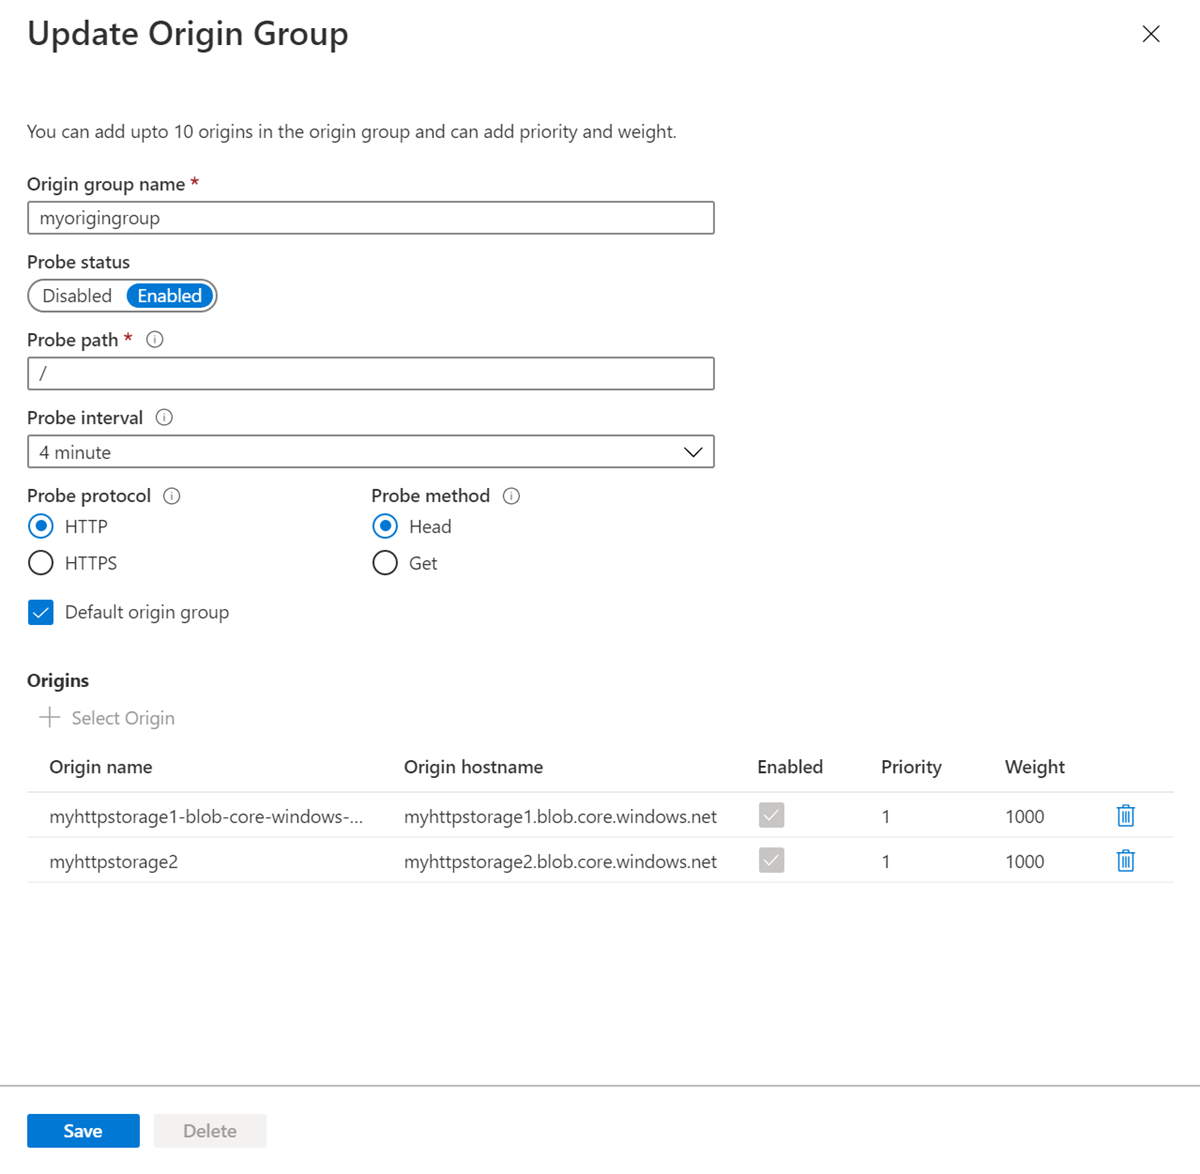 Verify additional origin added to group